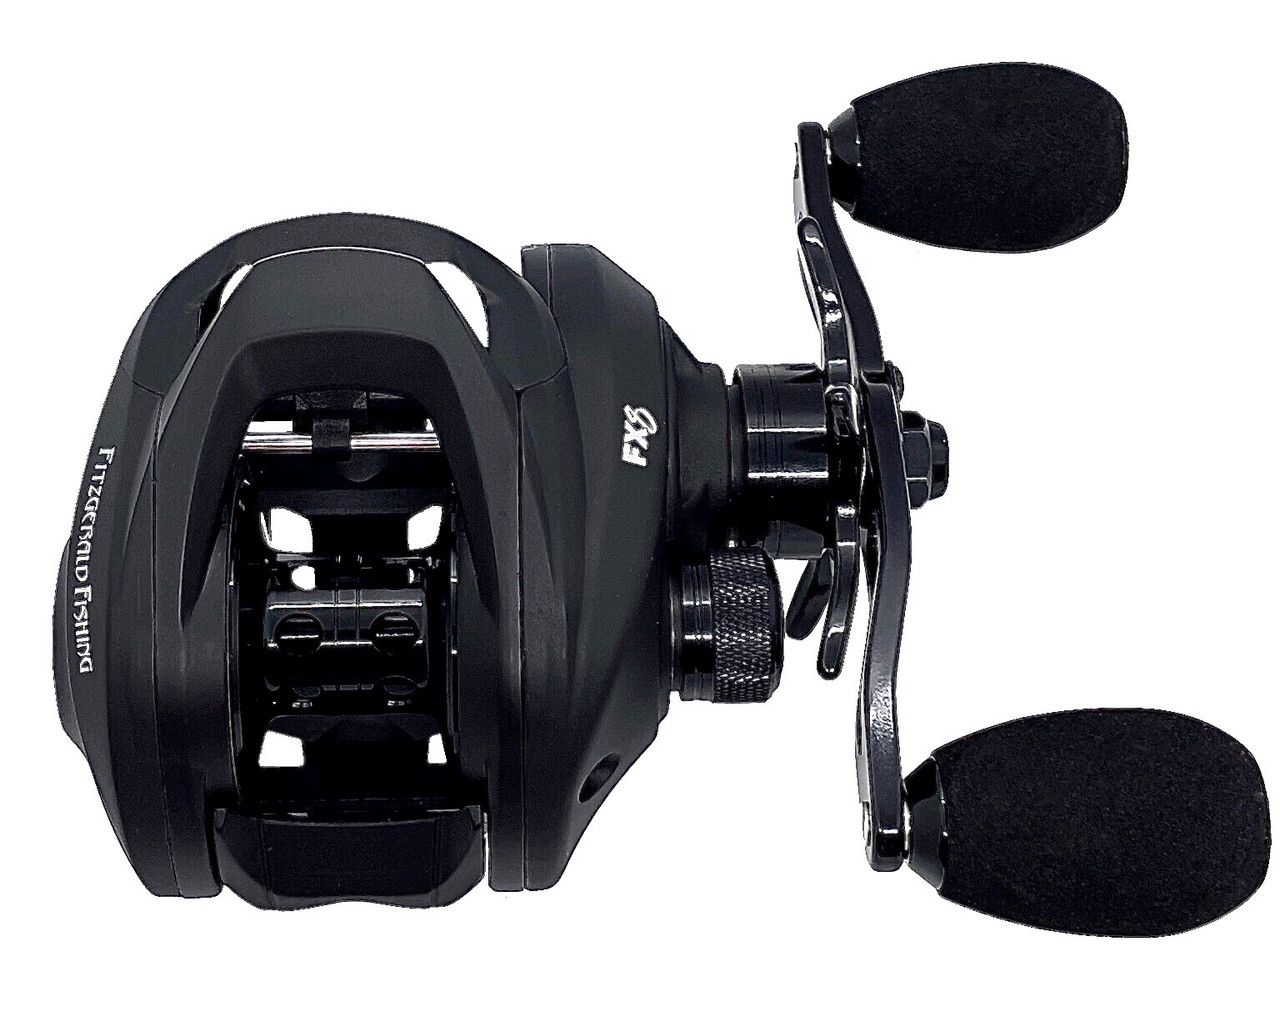 Long-Lasting and Low-Maintenance Fitzgerald Fishing FX8 Casting Reel  Available at .